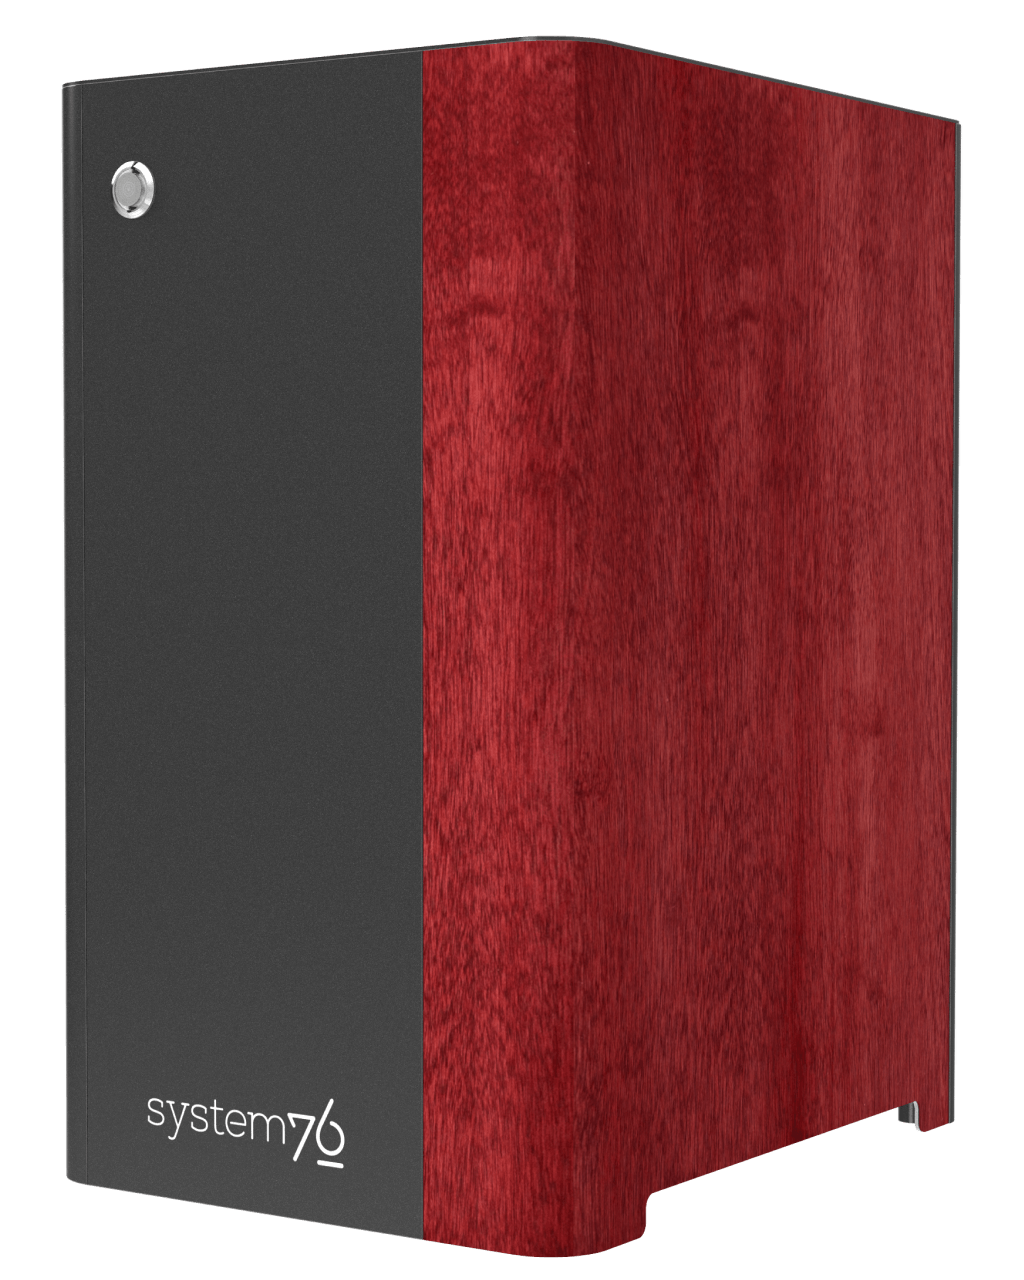 Side view of the machine showing birch veneer component, hand-polished, and stained red.